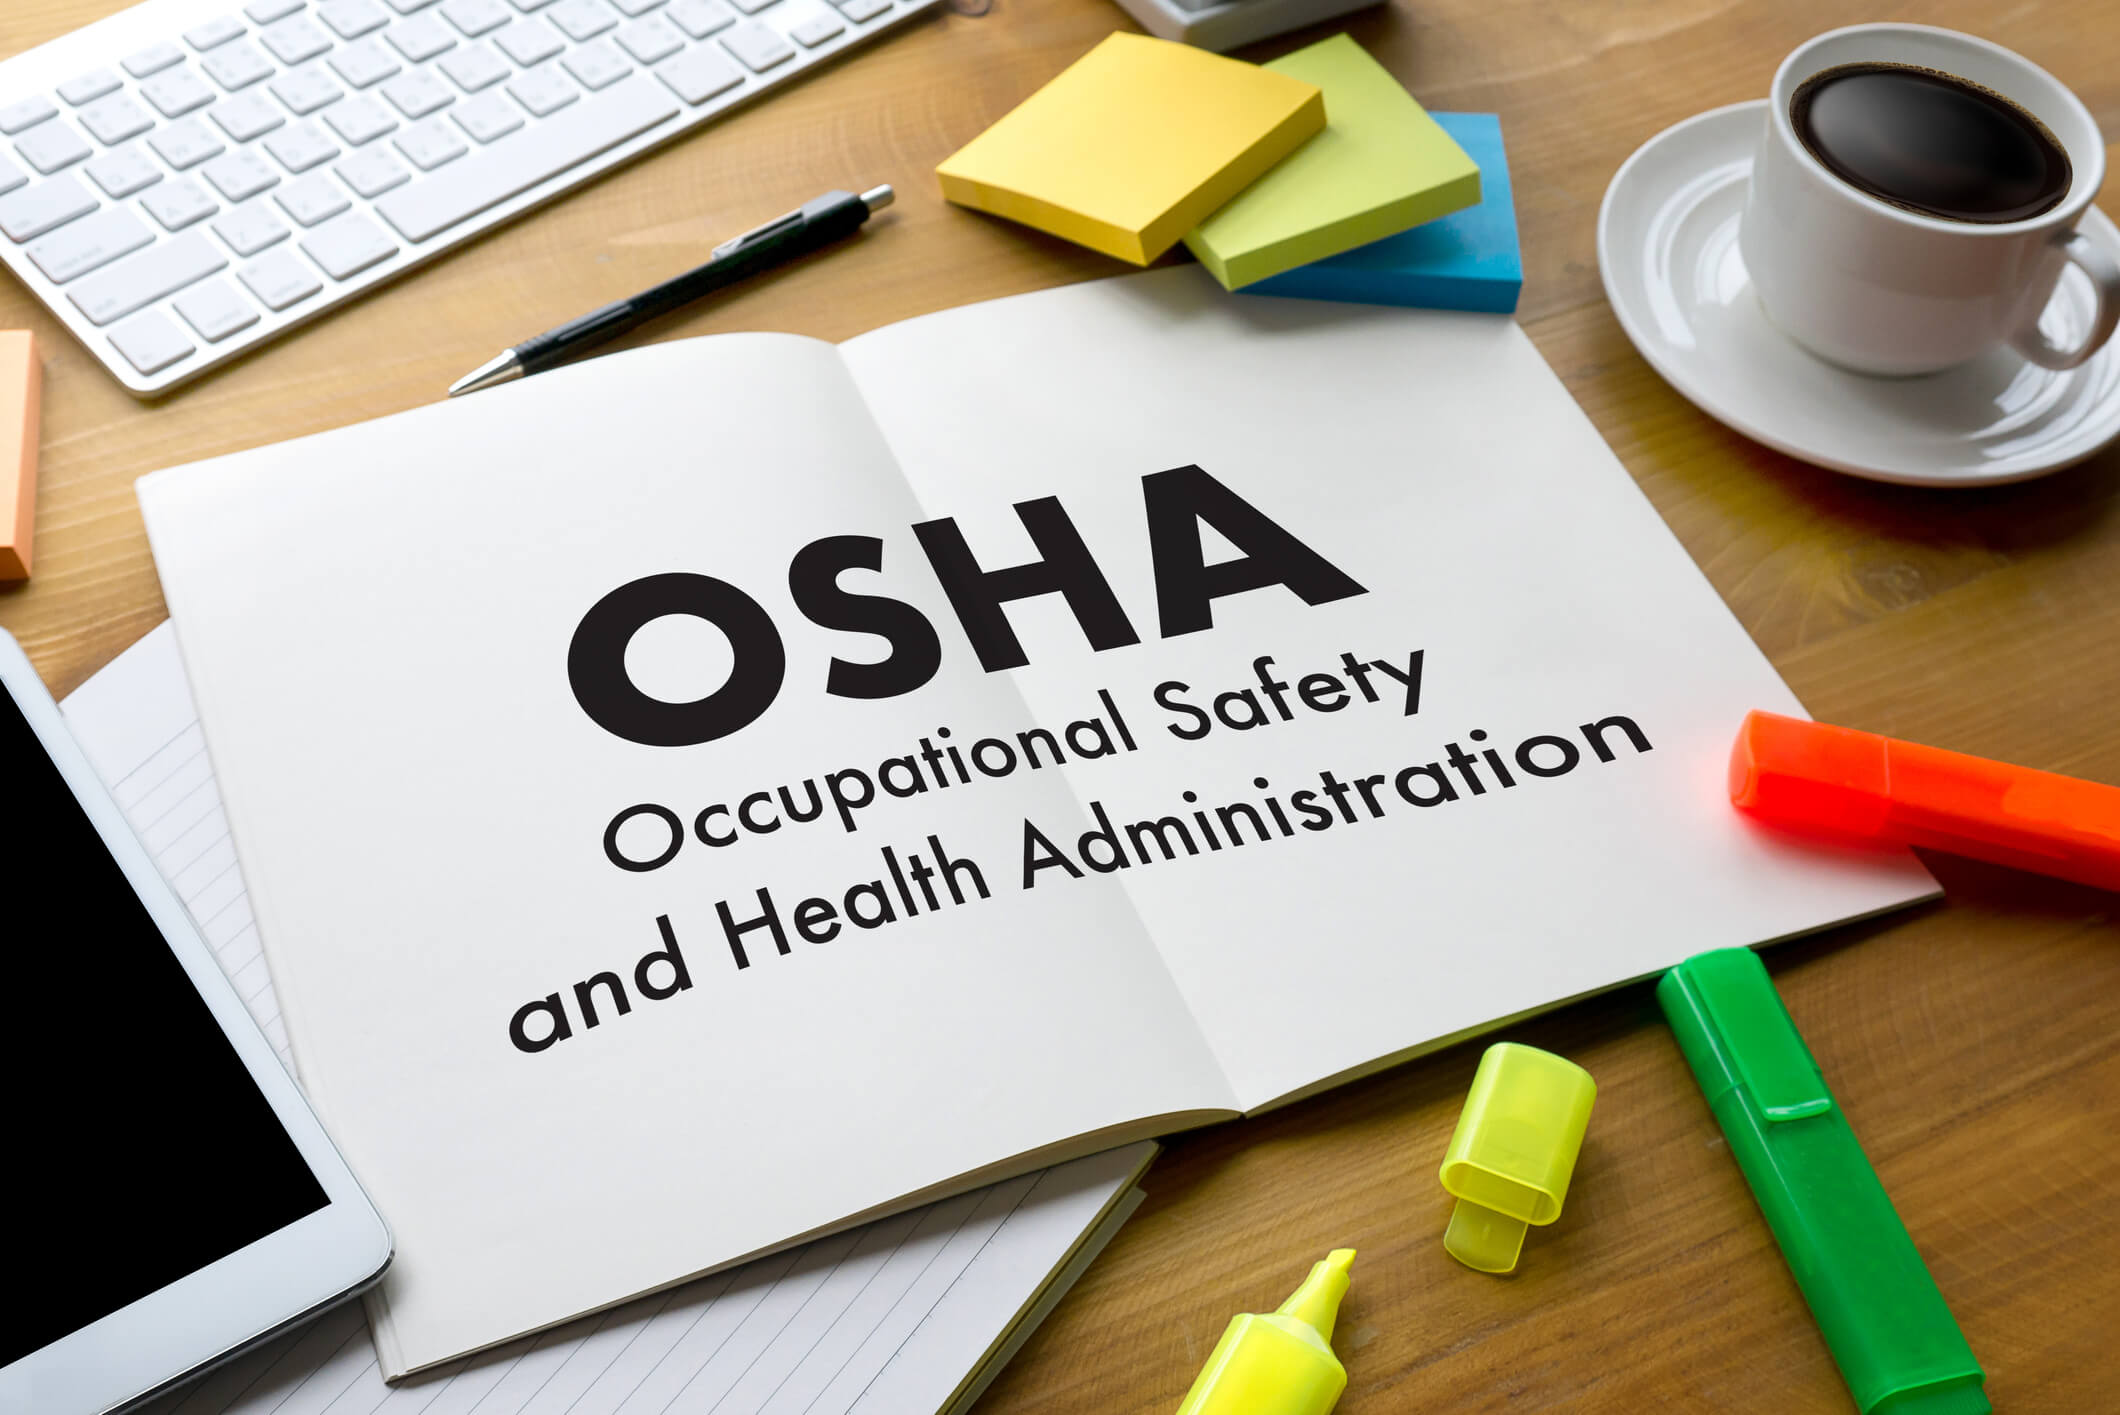 OSHA Occupational Safety and Health Administration